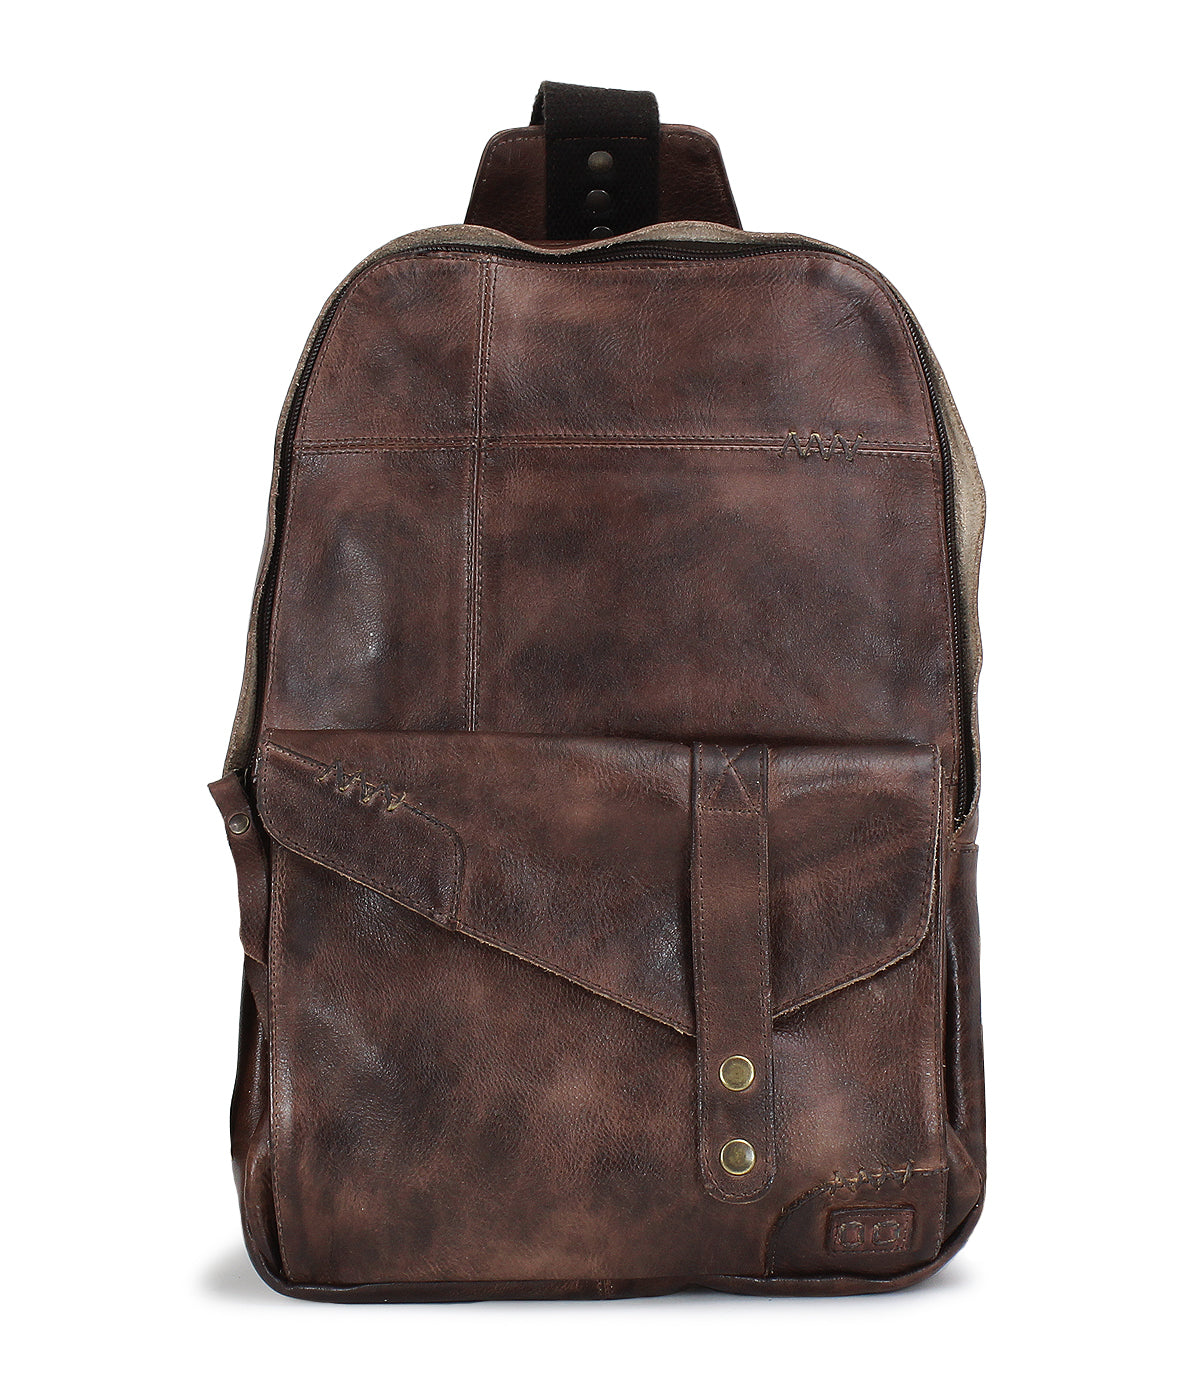 A Boss teak leather backpack by Bed Stu.